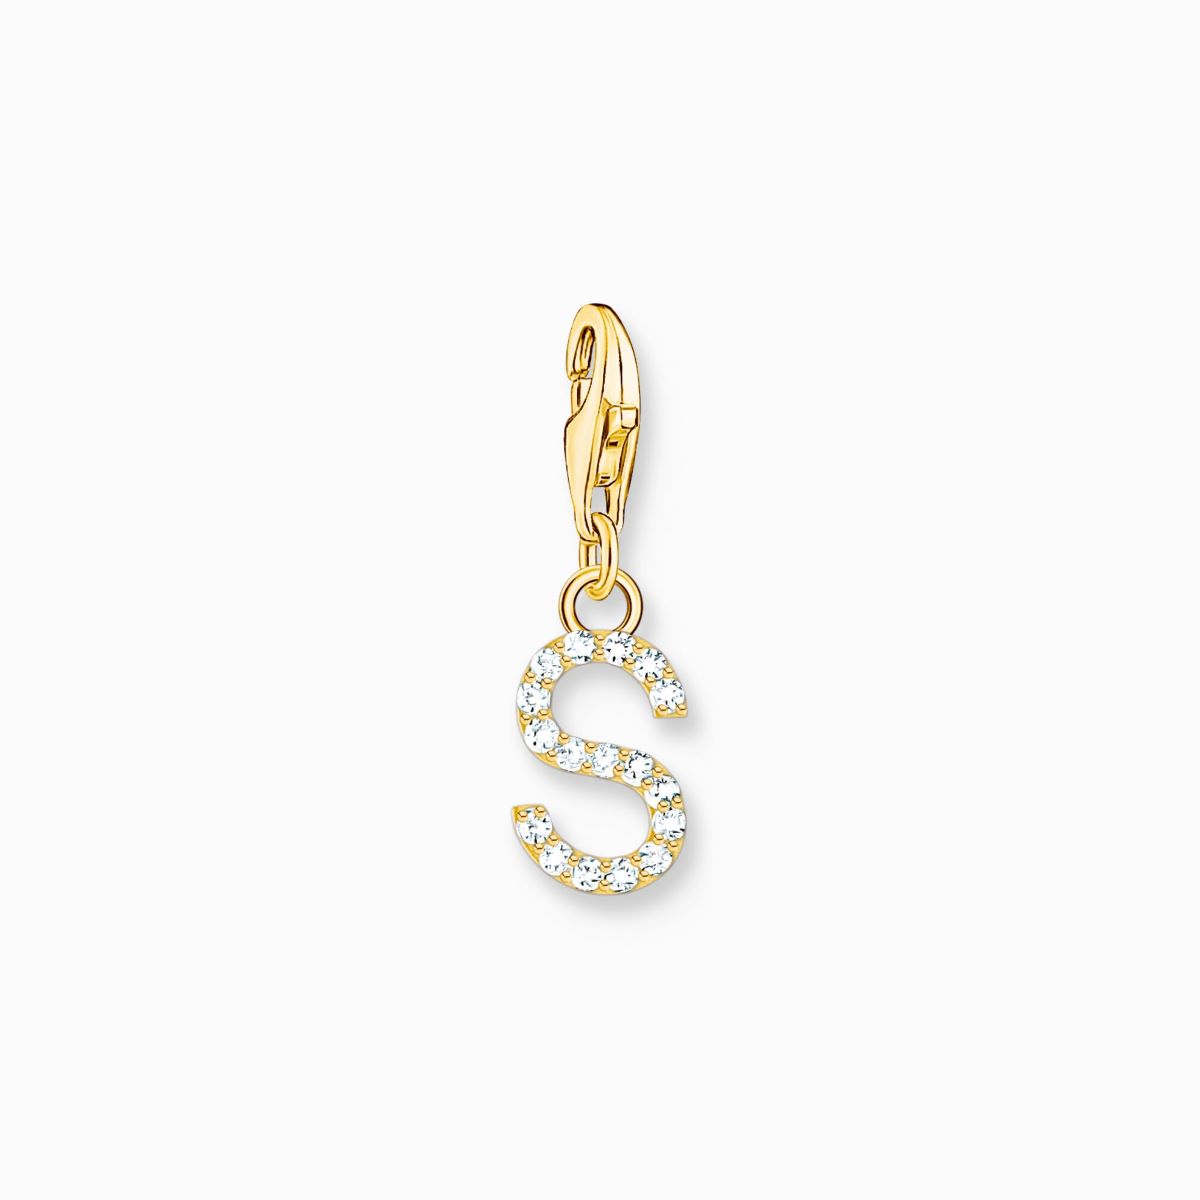 Photos - Other Jewellery Thomas Sabo Letter S Charm Pendant - Gold with White Zirconia 